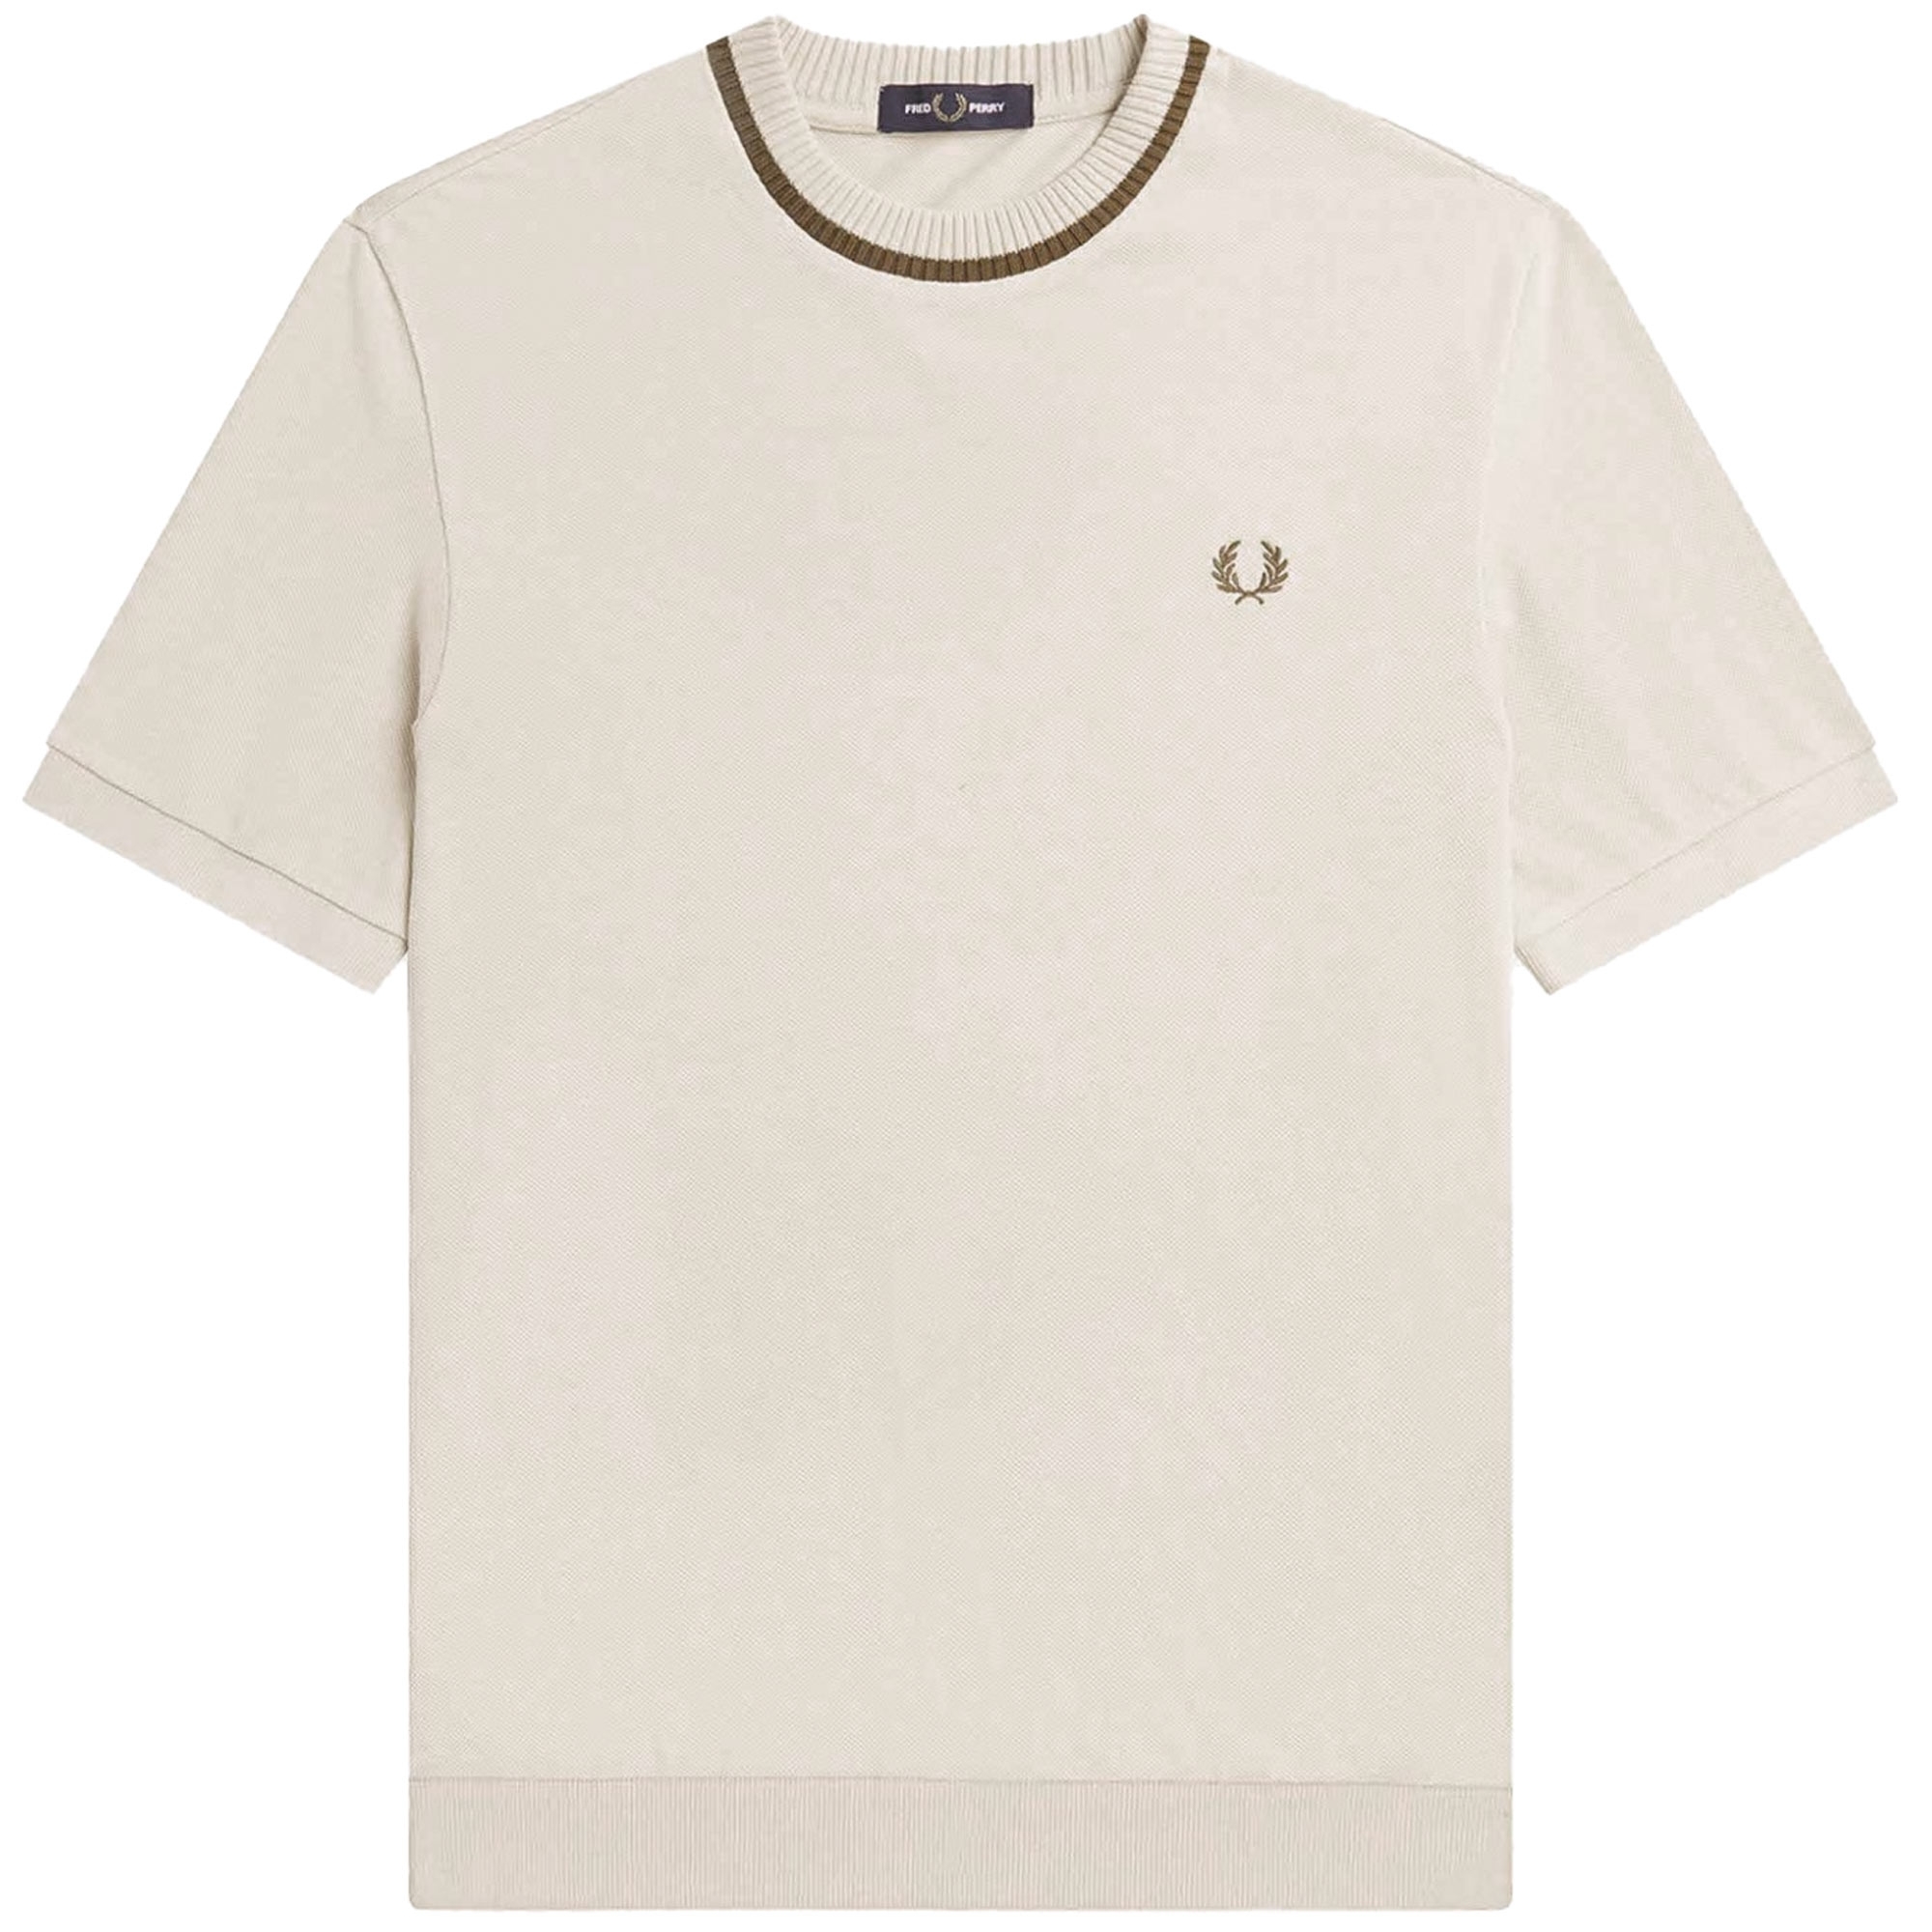 Fred Perry Crew Neck Pique T-Shirt - Snow White